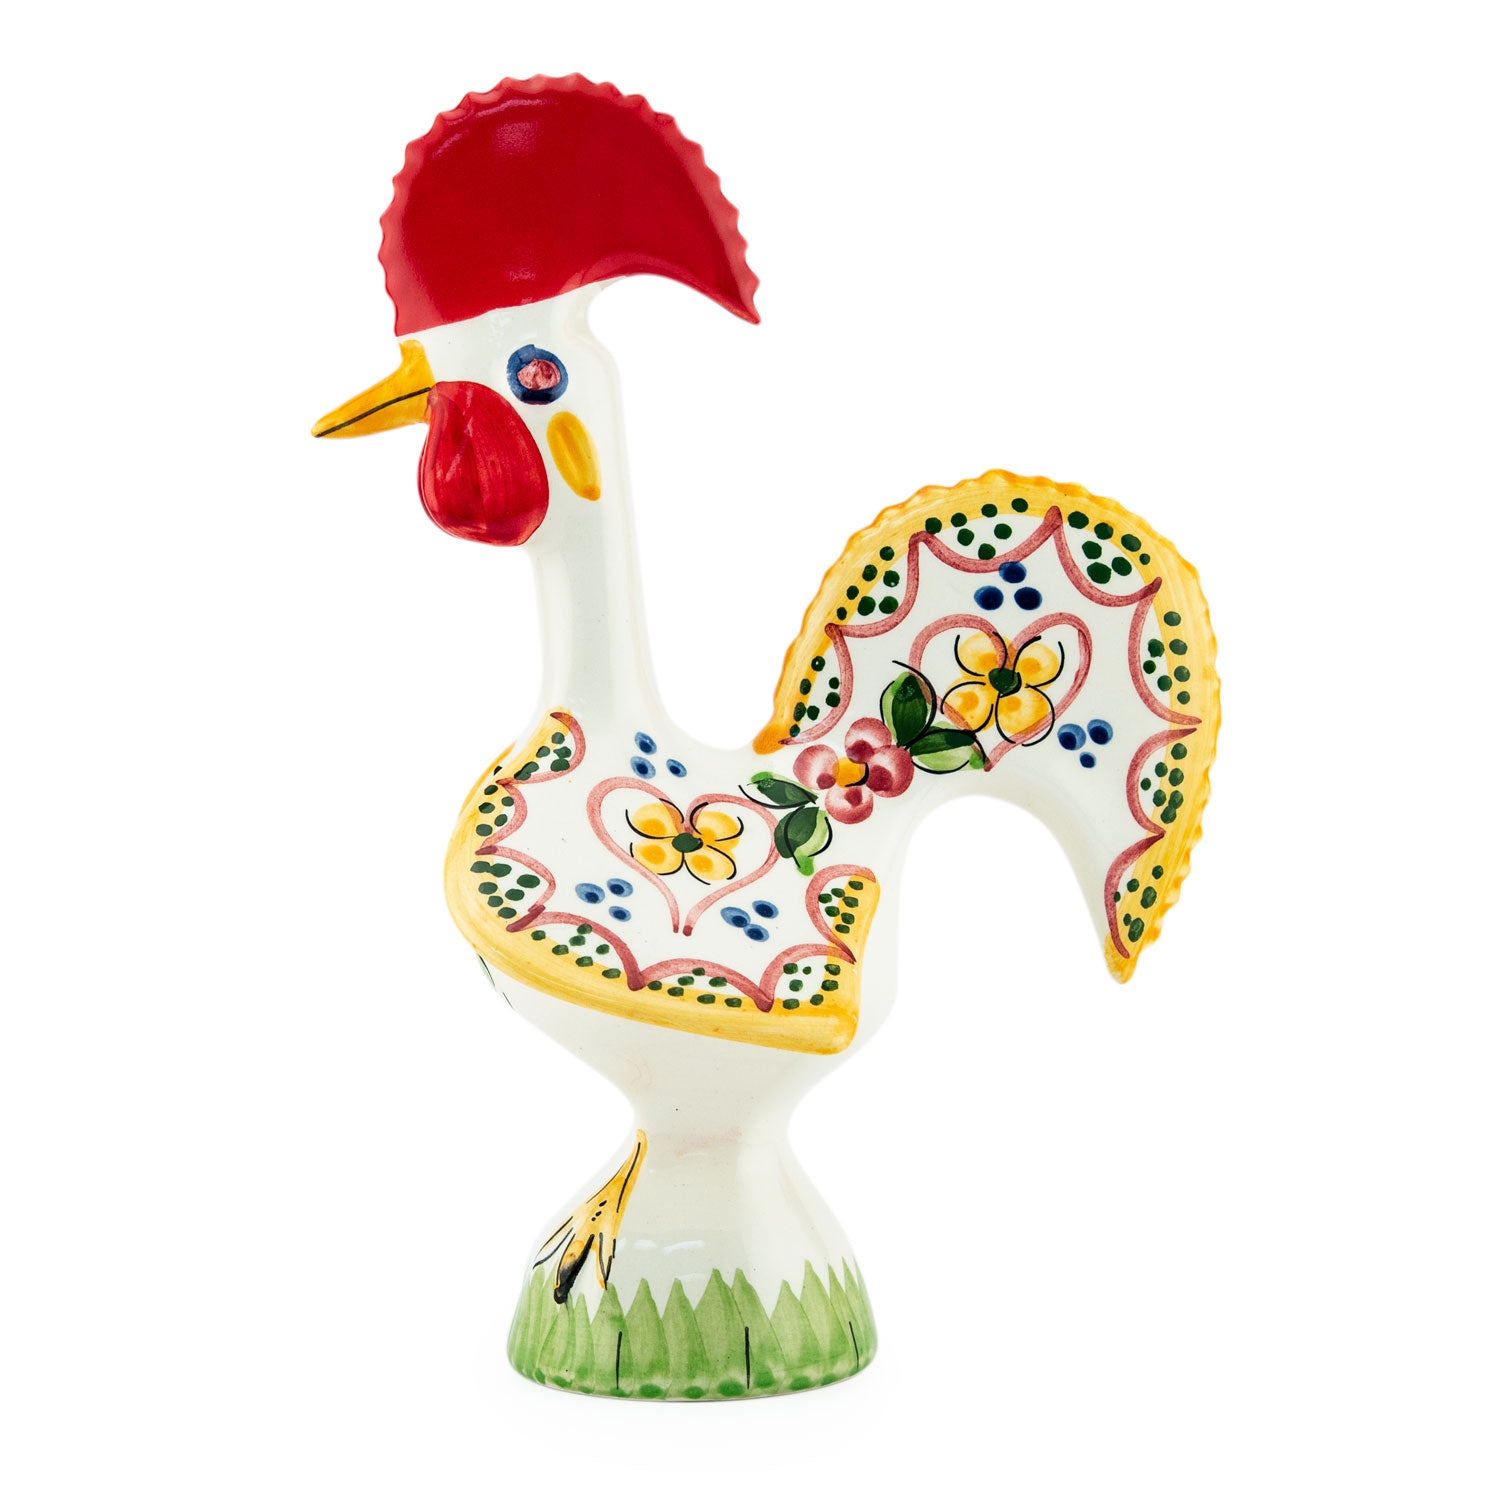 Alcobaca Rooster Figurine